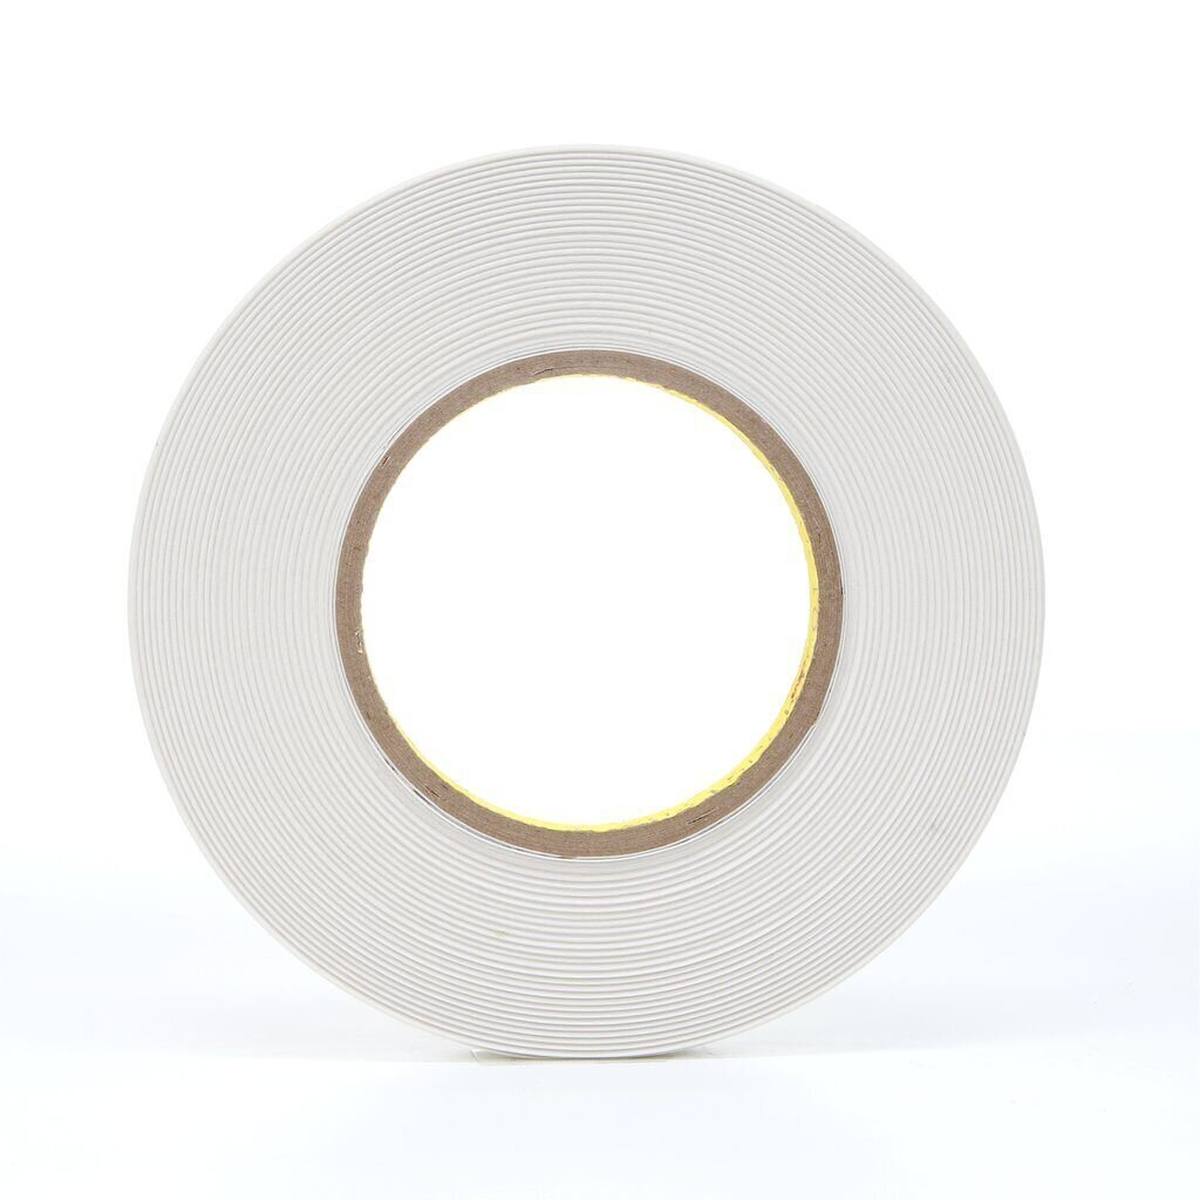 3M Double-sided adhesive tape with polyester backing 9415PC, translucent, 19 mm x 66 m, 0.05 mm